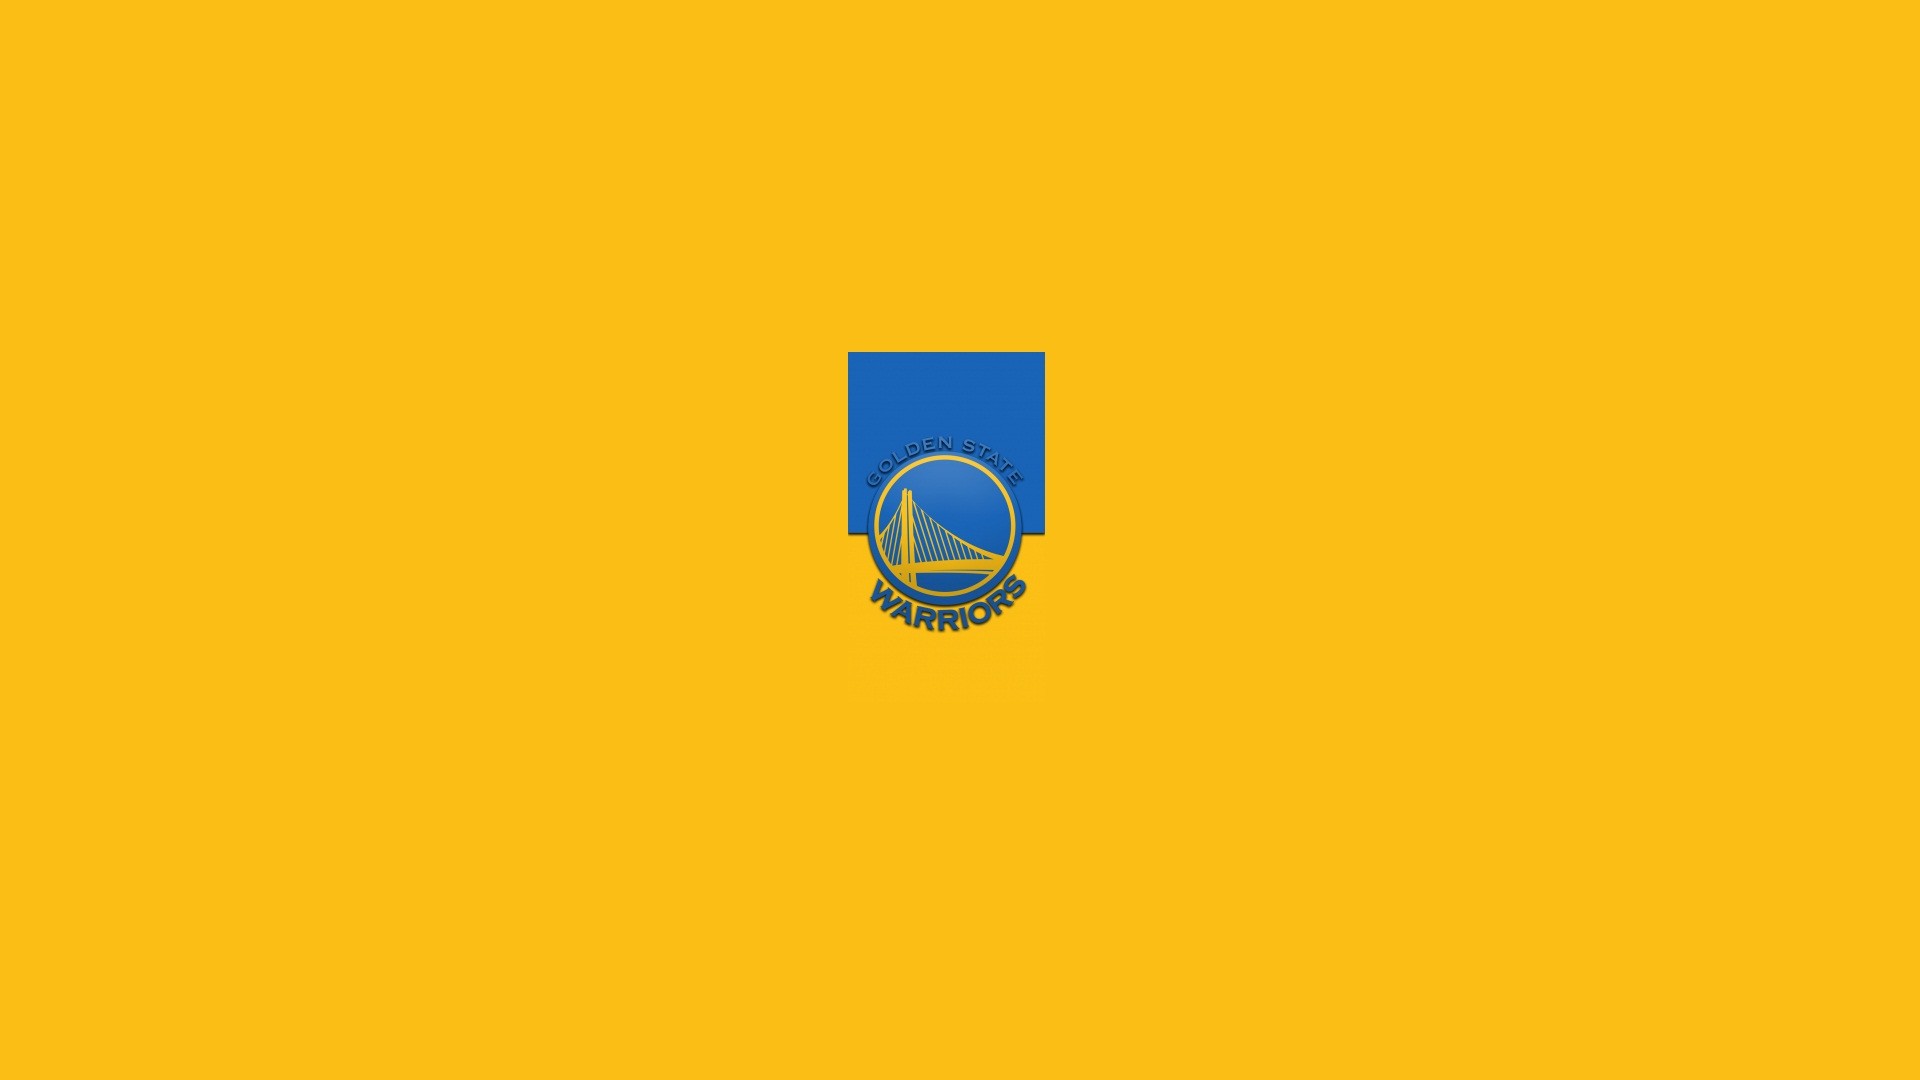 Wallpapers HD Golden State Warriors Logo with image dimensions 1920x1080 pixel. You can make this wallpaper for your Desktop Computer Backgrounds, Windows or Mac Screensavers, iPhone Lock screen, Tablet or Android and another Mobile Phone device